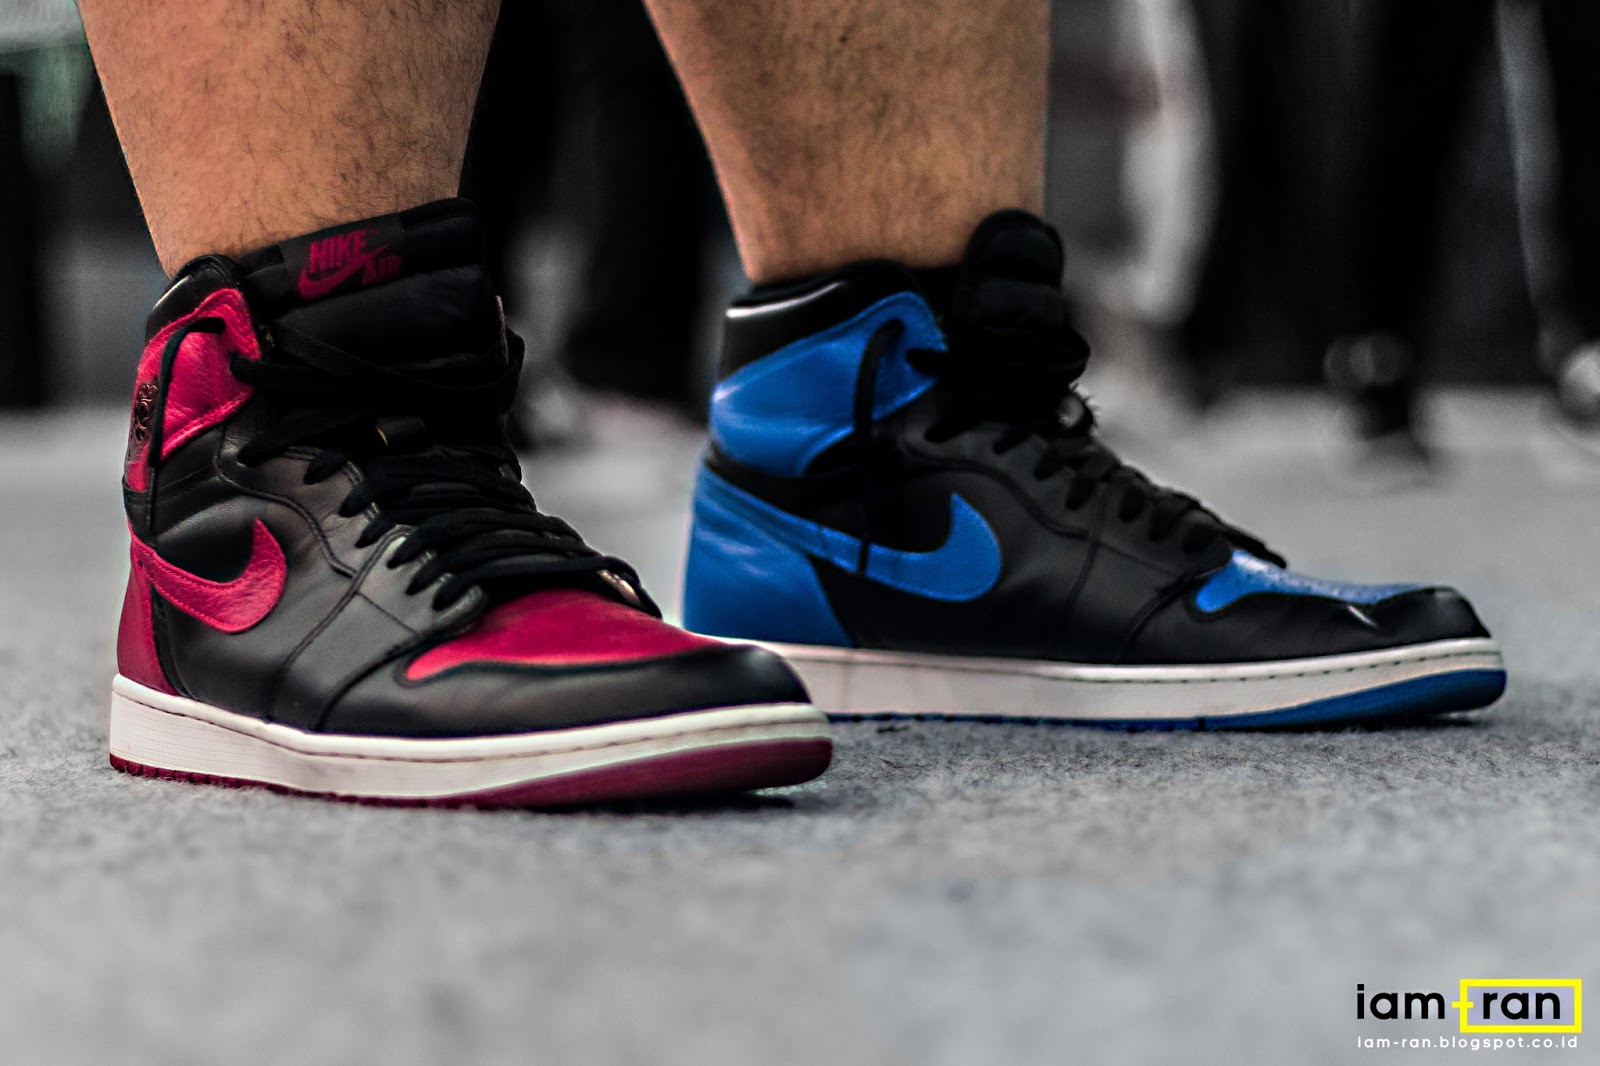 Royal Blue 1s On Feet Shop Clothing Shoes Online